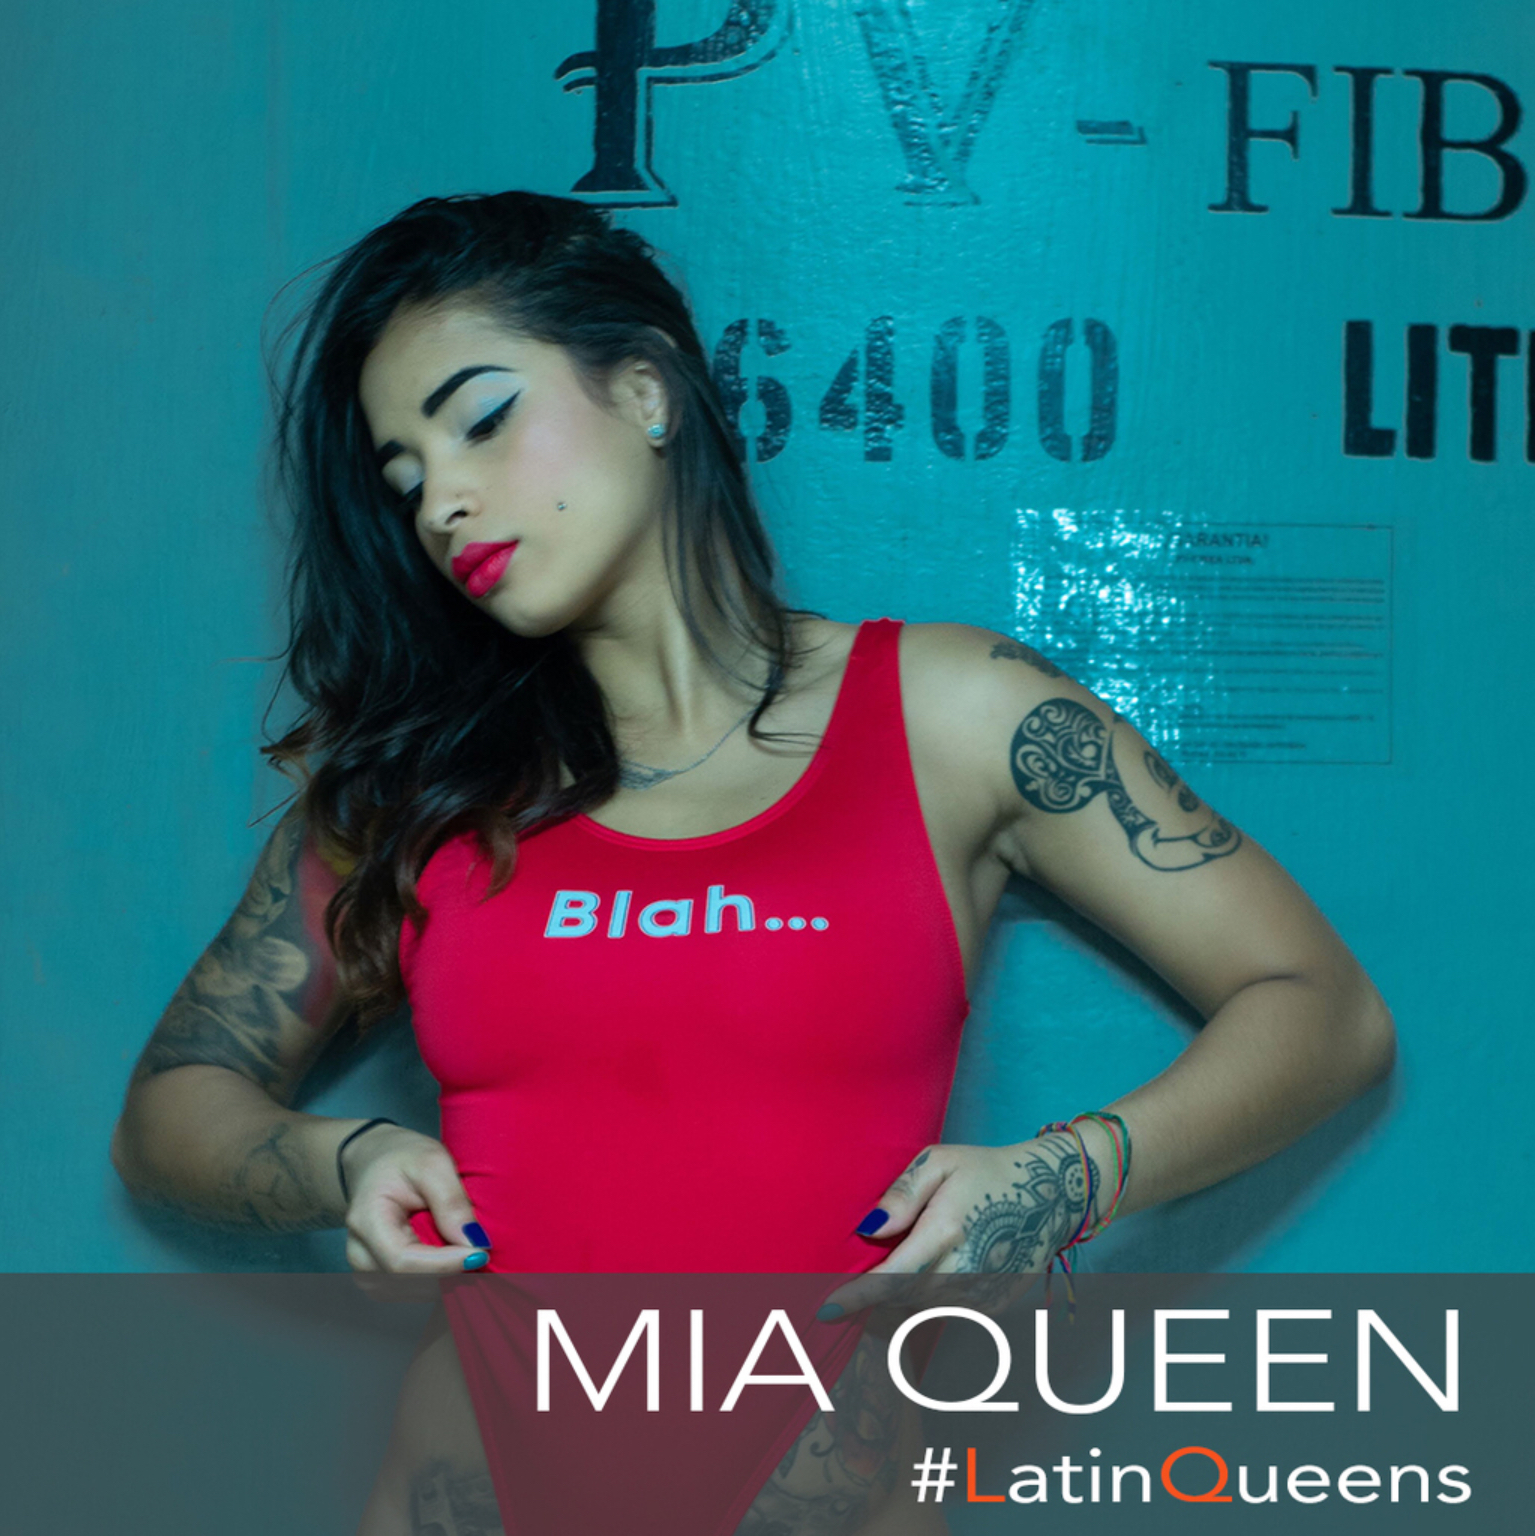 Mia Queen and friends are waiting!
Subscribe now @yosoyMiaQueen #LatinQueens
https://t.co/ZBQ7CaSIE0